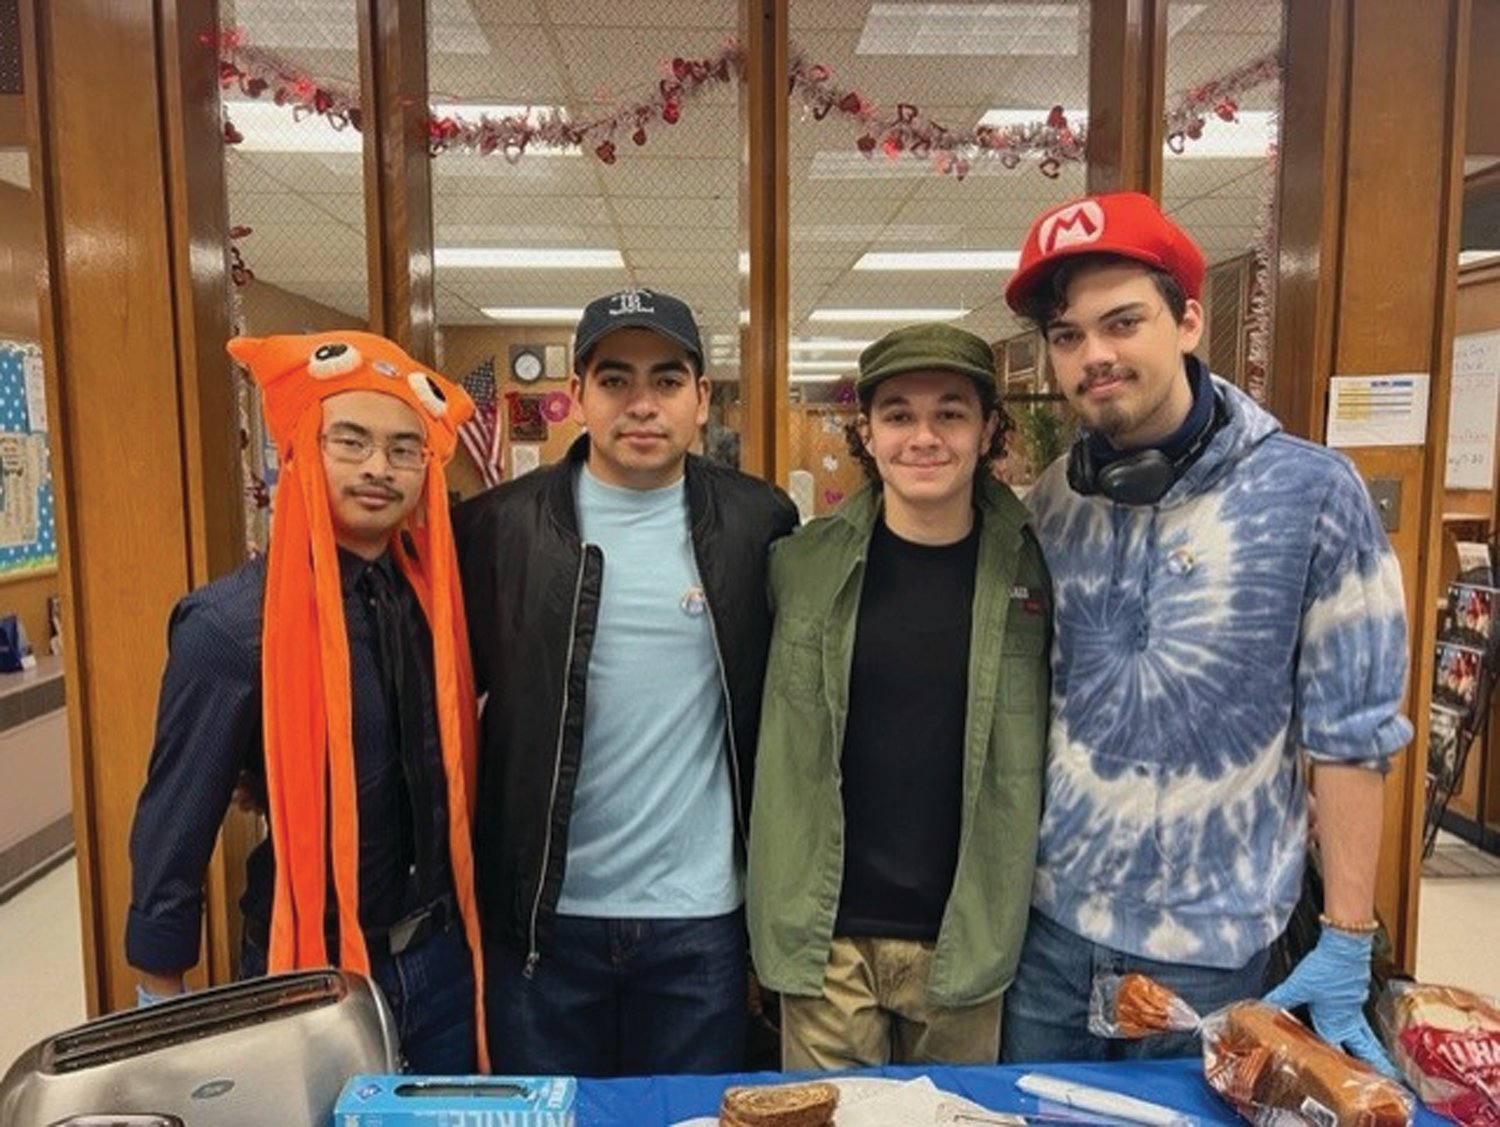 CRAZY CAPS: From left to right, Ricsa Soth, Joshua Galeas, Willson El Hage and Phoenix Russell pose for a photo on Crazy Hat Day.